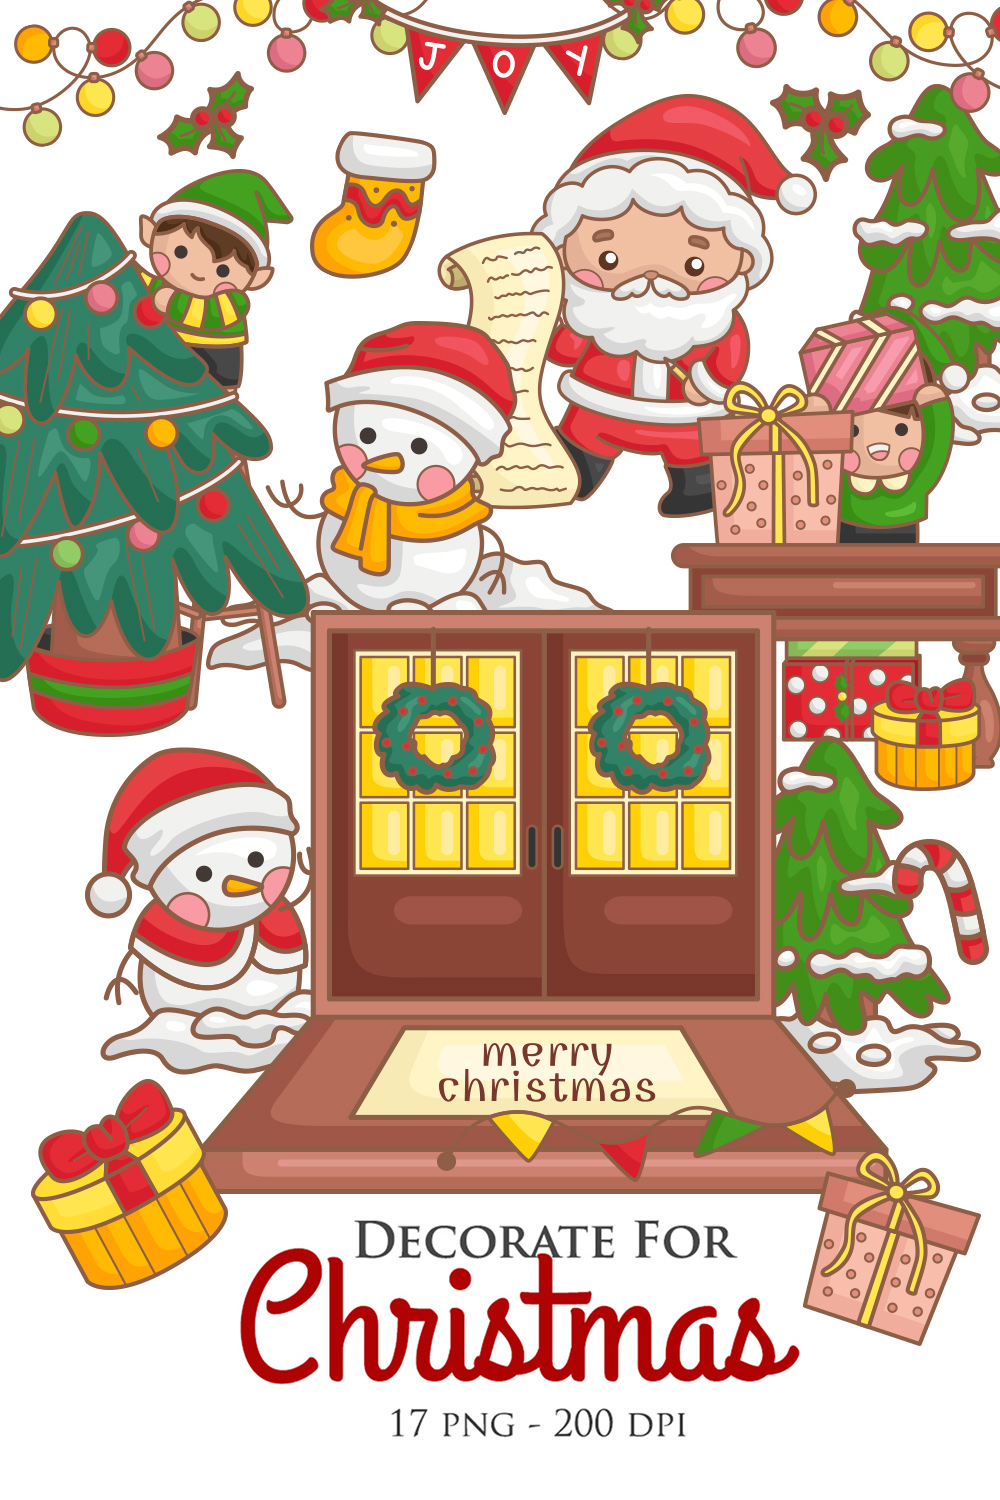 Decorated for Christmas Character Snowman Santa Claus Elf Holiday Decoration Background Cartoon Illustration Vector Clipart Sticker pinterest preview image.